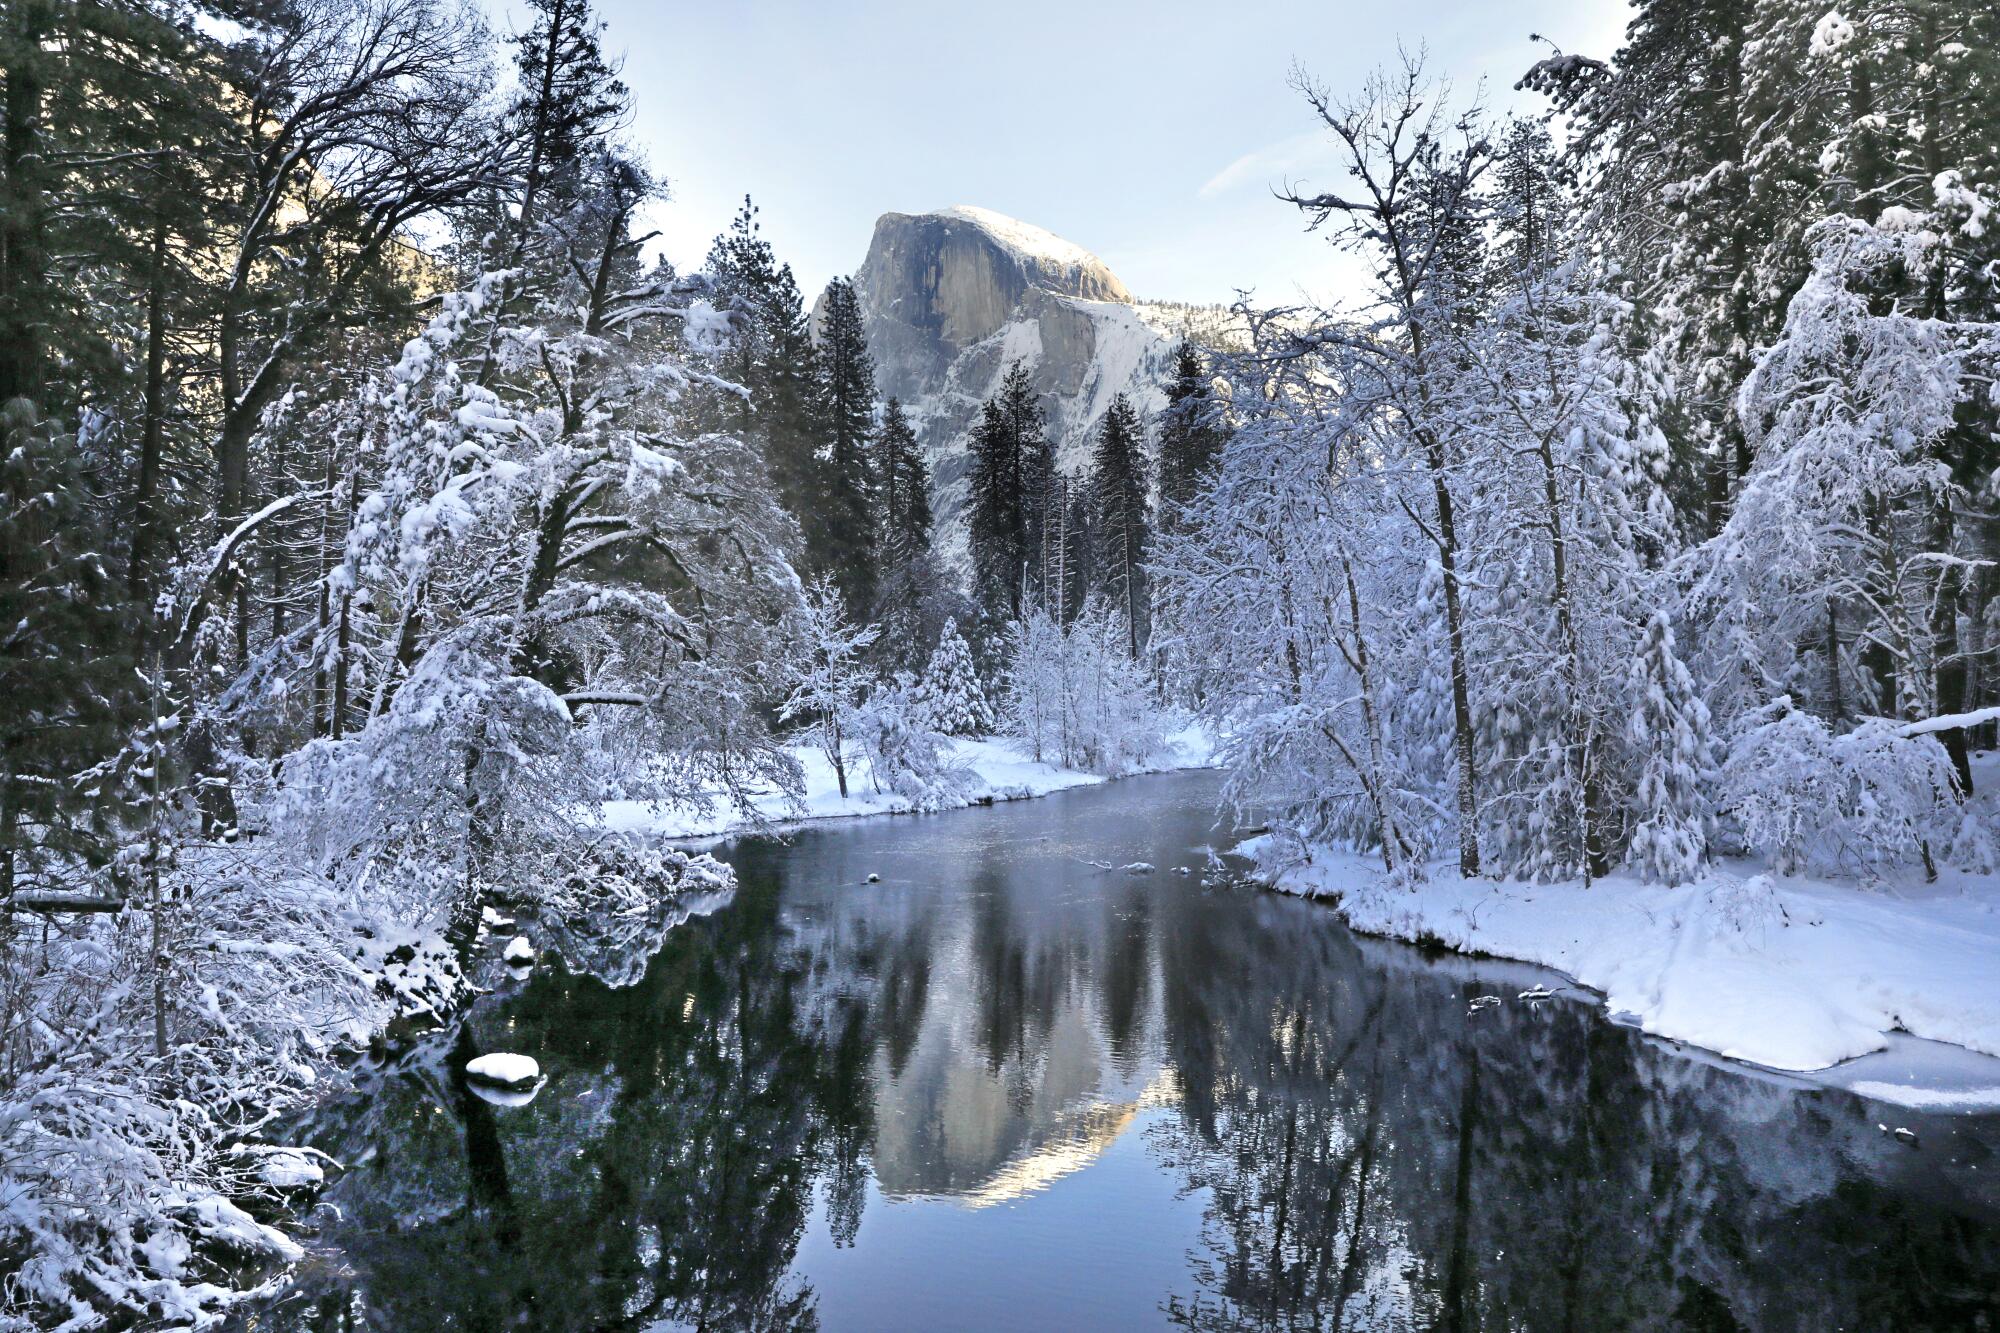 A snowy Half Dome is reflected in the river.